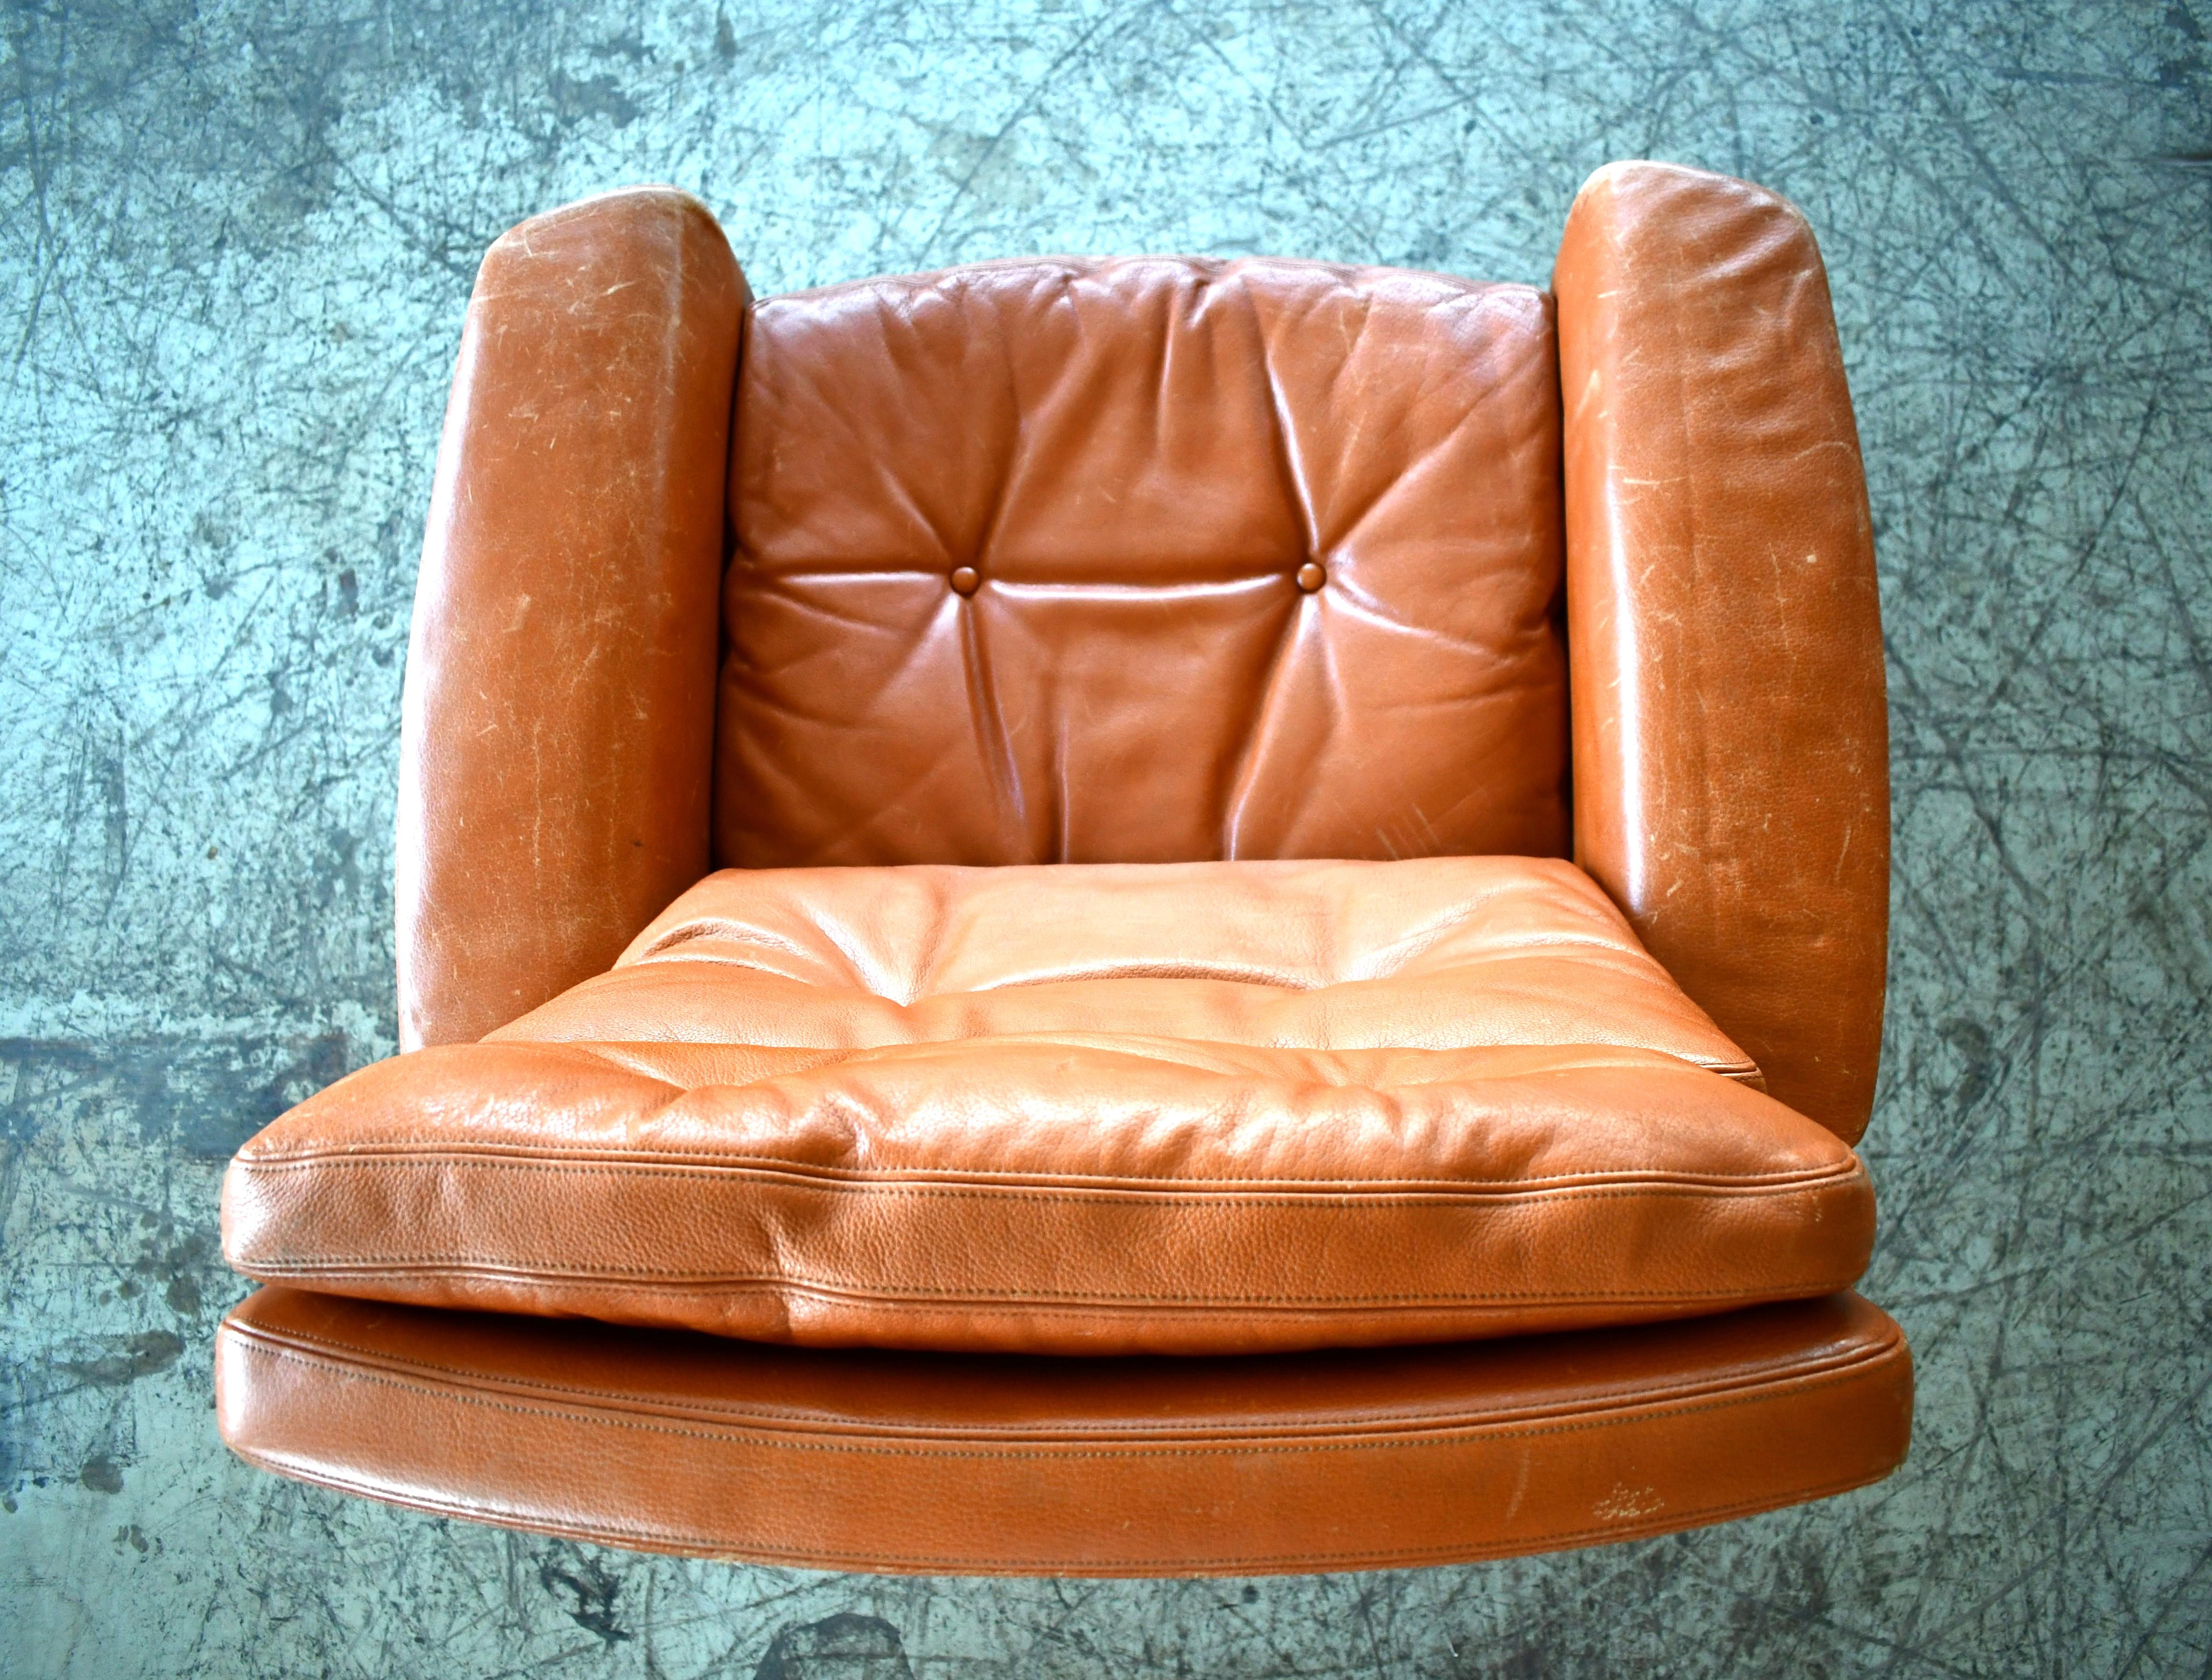 Danish High Back Swivel Lounge Chair with Ottoman in Cognac Leather, 1970's For Sale 3